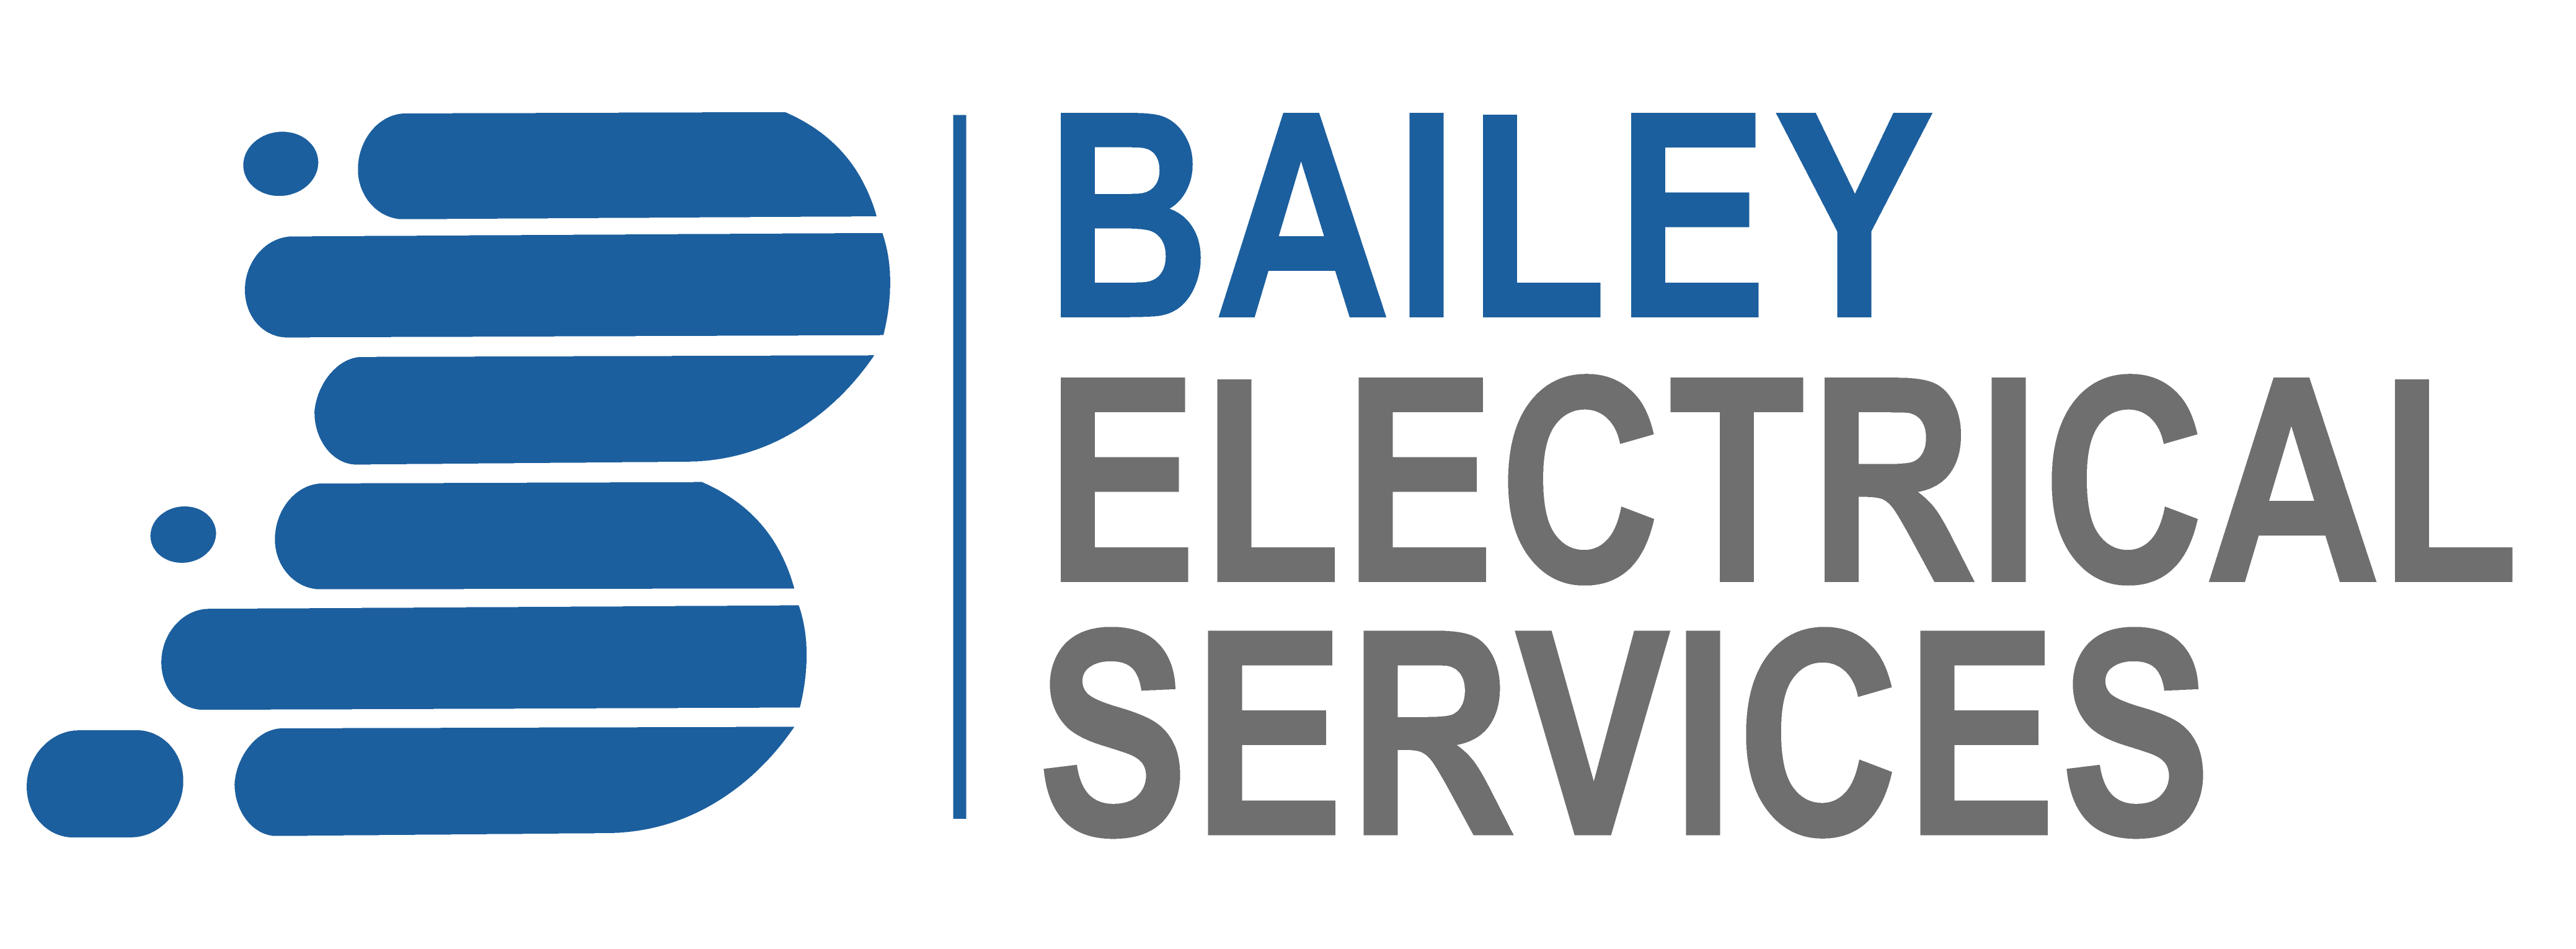 Bailey Electrical Services